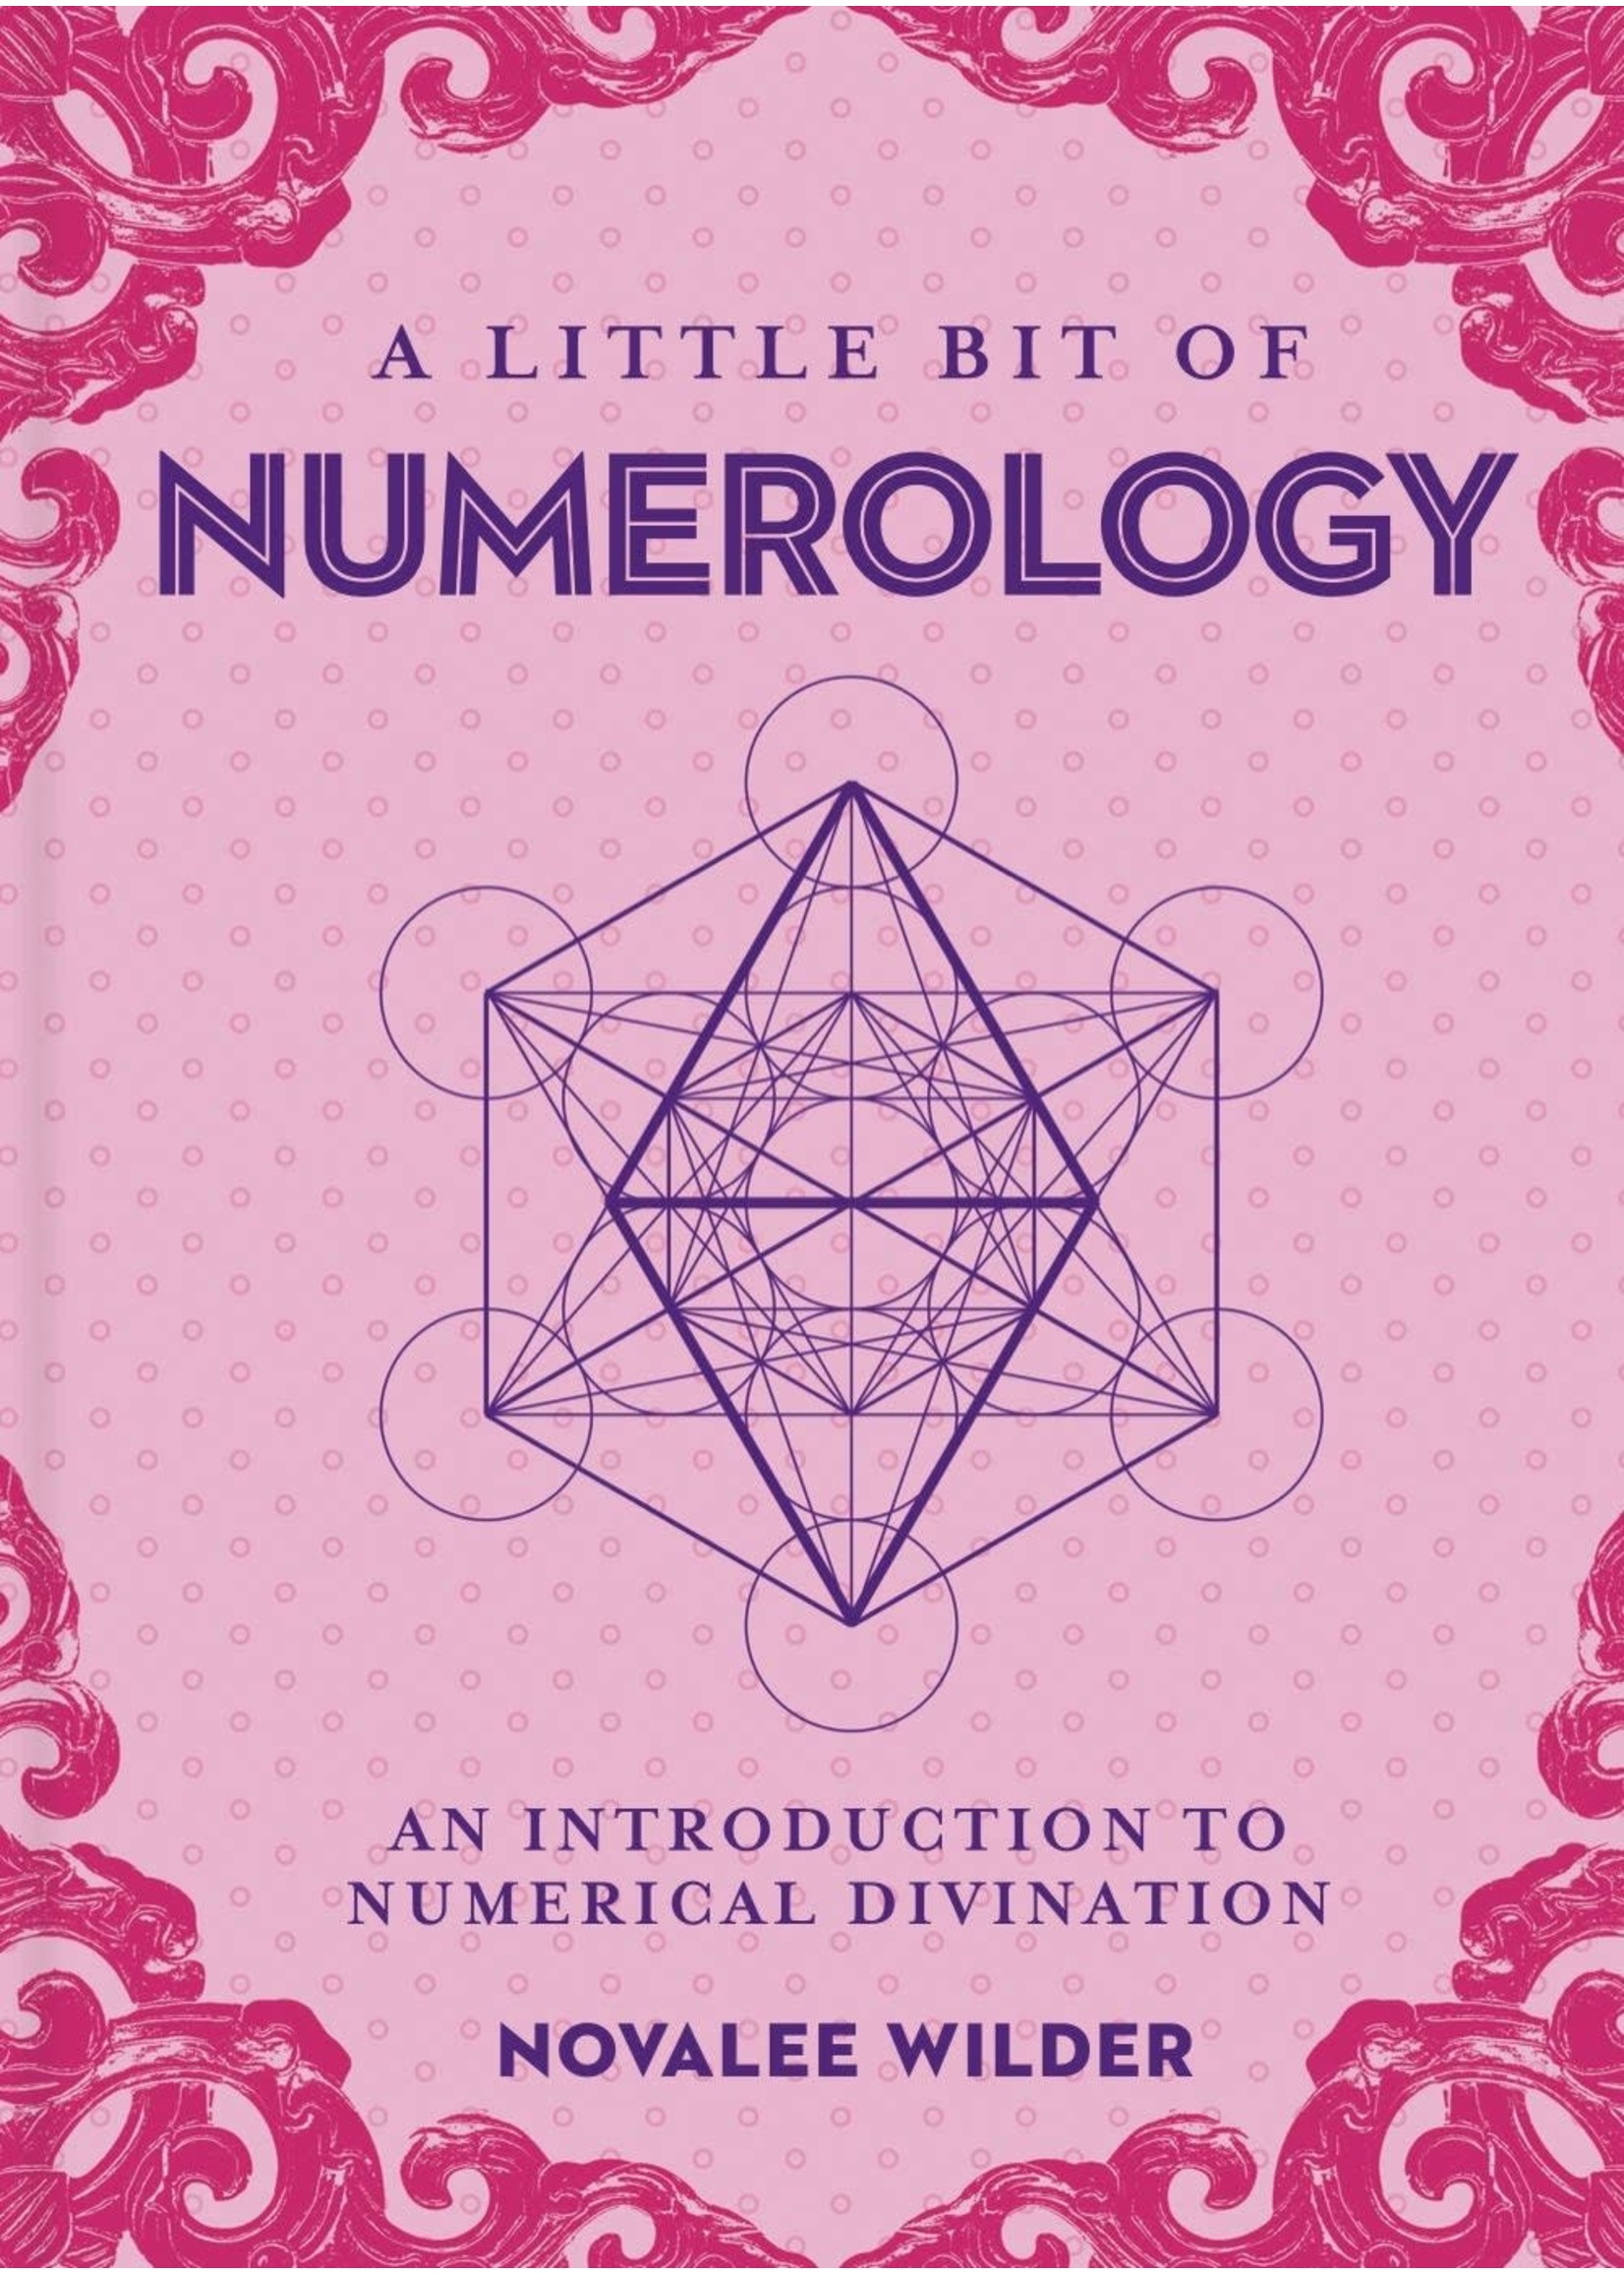 A Little Bit of Numerology- An Introduction to Numerical Divination